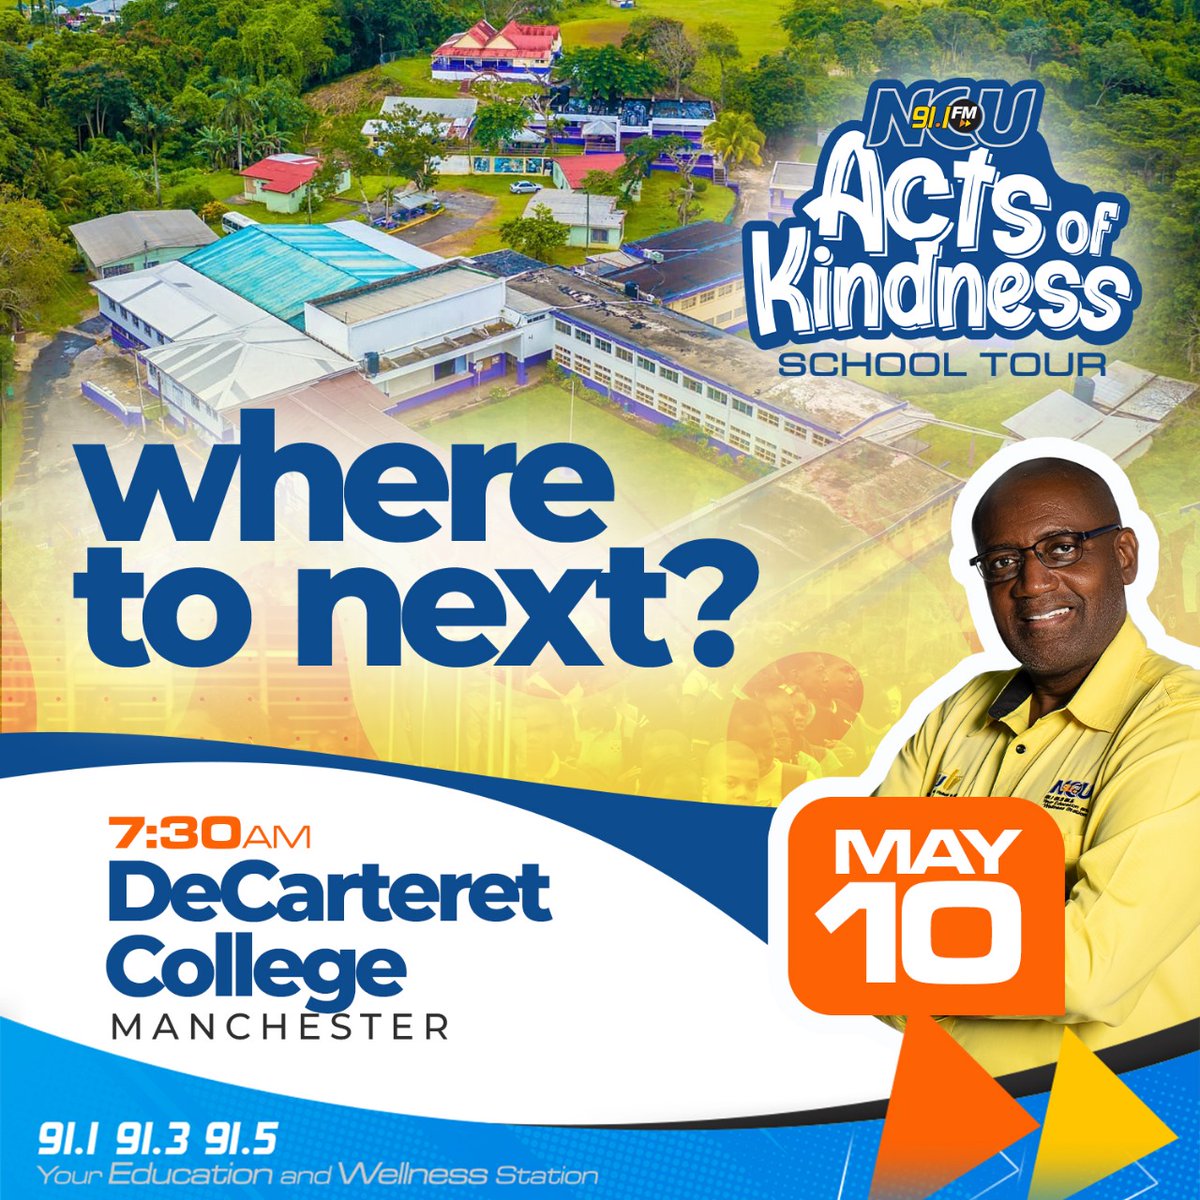 Friday quickly approaches and so does the next stop on our Acts Of Kindness School Tour.🚌 DeCarteret College you are up next and we are looking forward to a great time!!

Join us live on air during First Light on NCU91FM! 📻 

 #actsofkindnesstour #ncu91fm #childsmonth